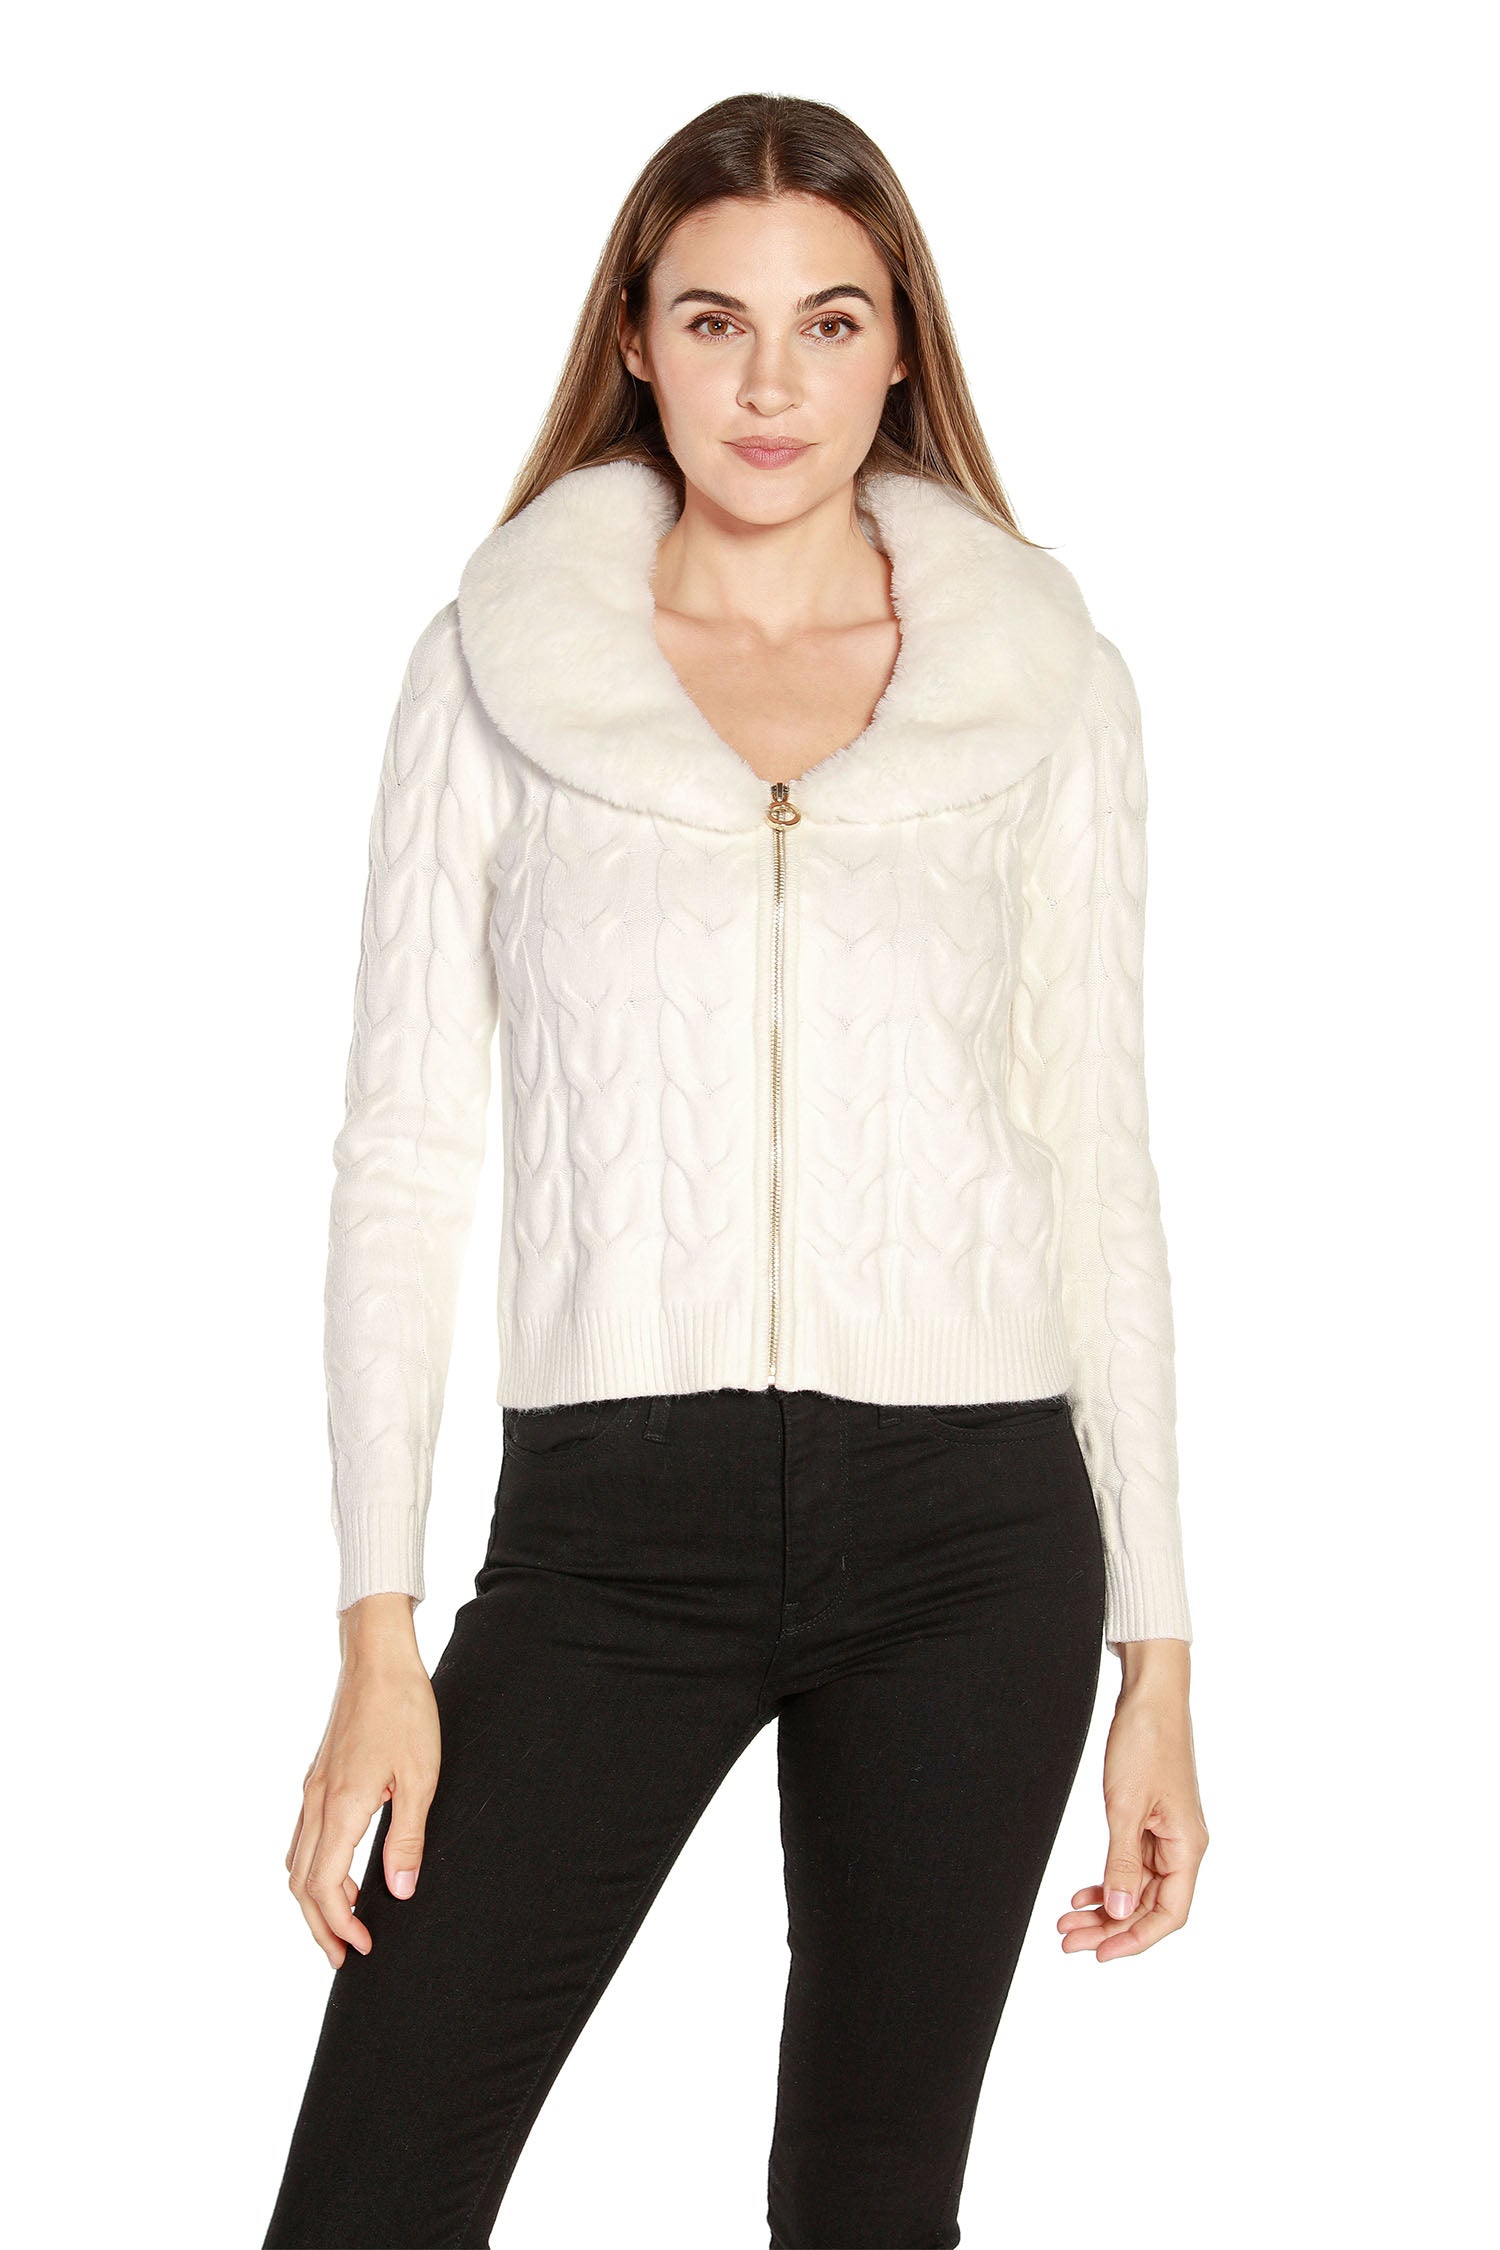 Women's Zip Front Cable Knit Cardigan Sweater with Faux Fur Collar